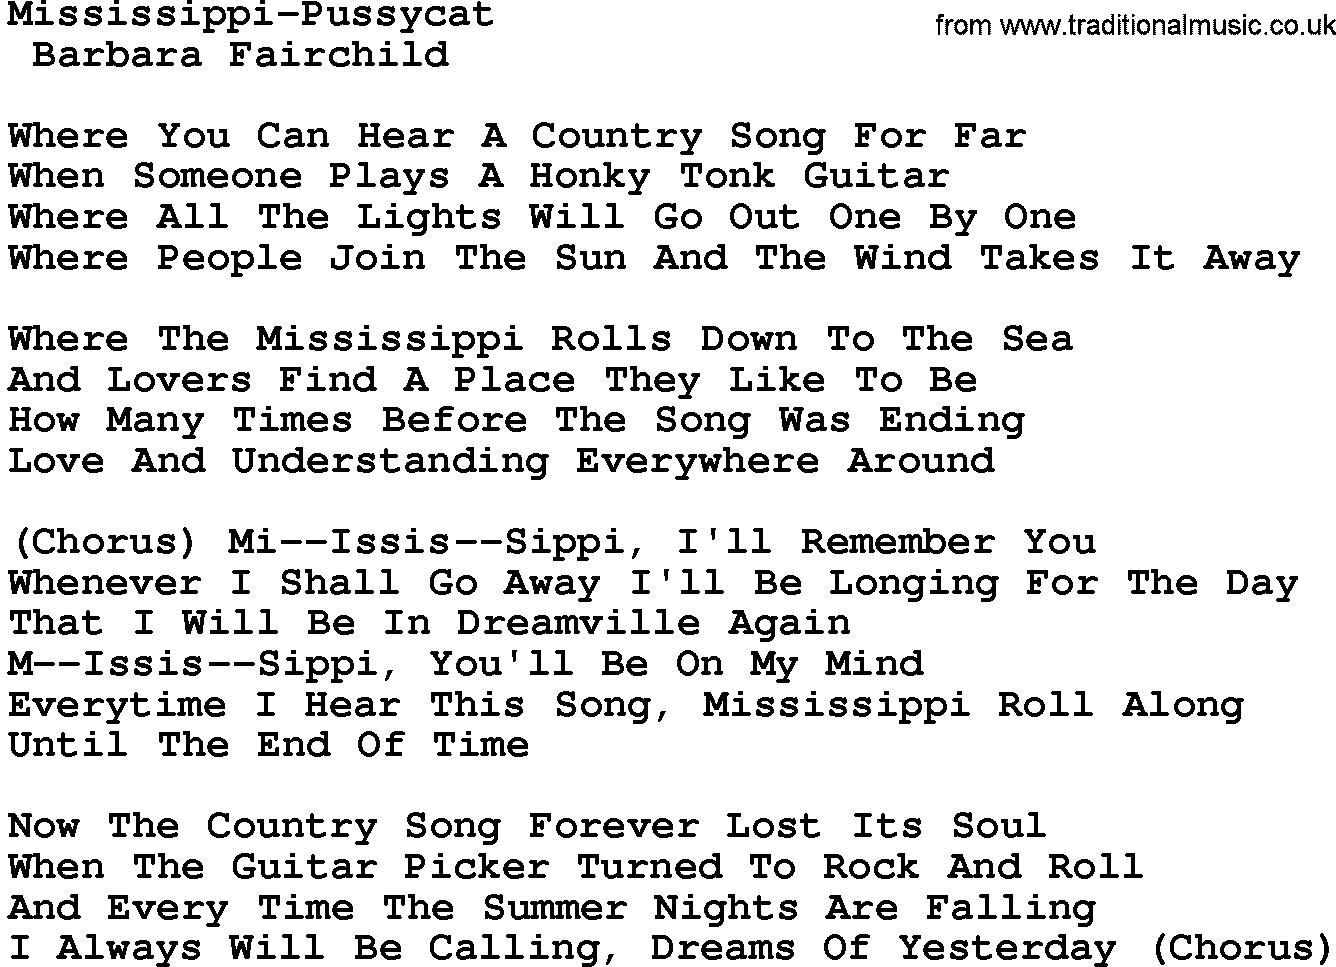 Country music song: Mississippi-Pussycat lyrics and chords